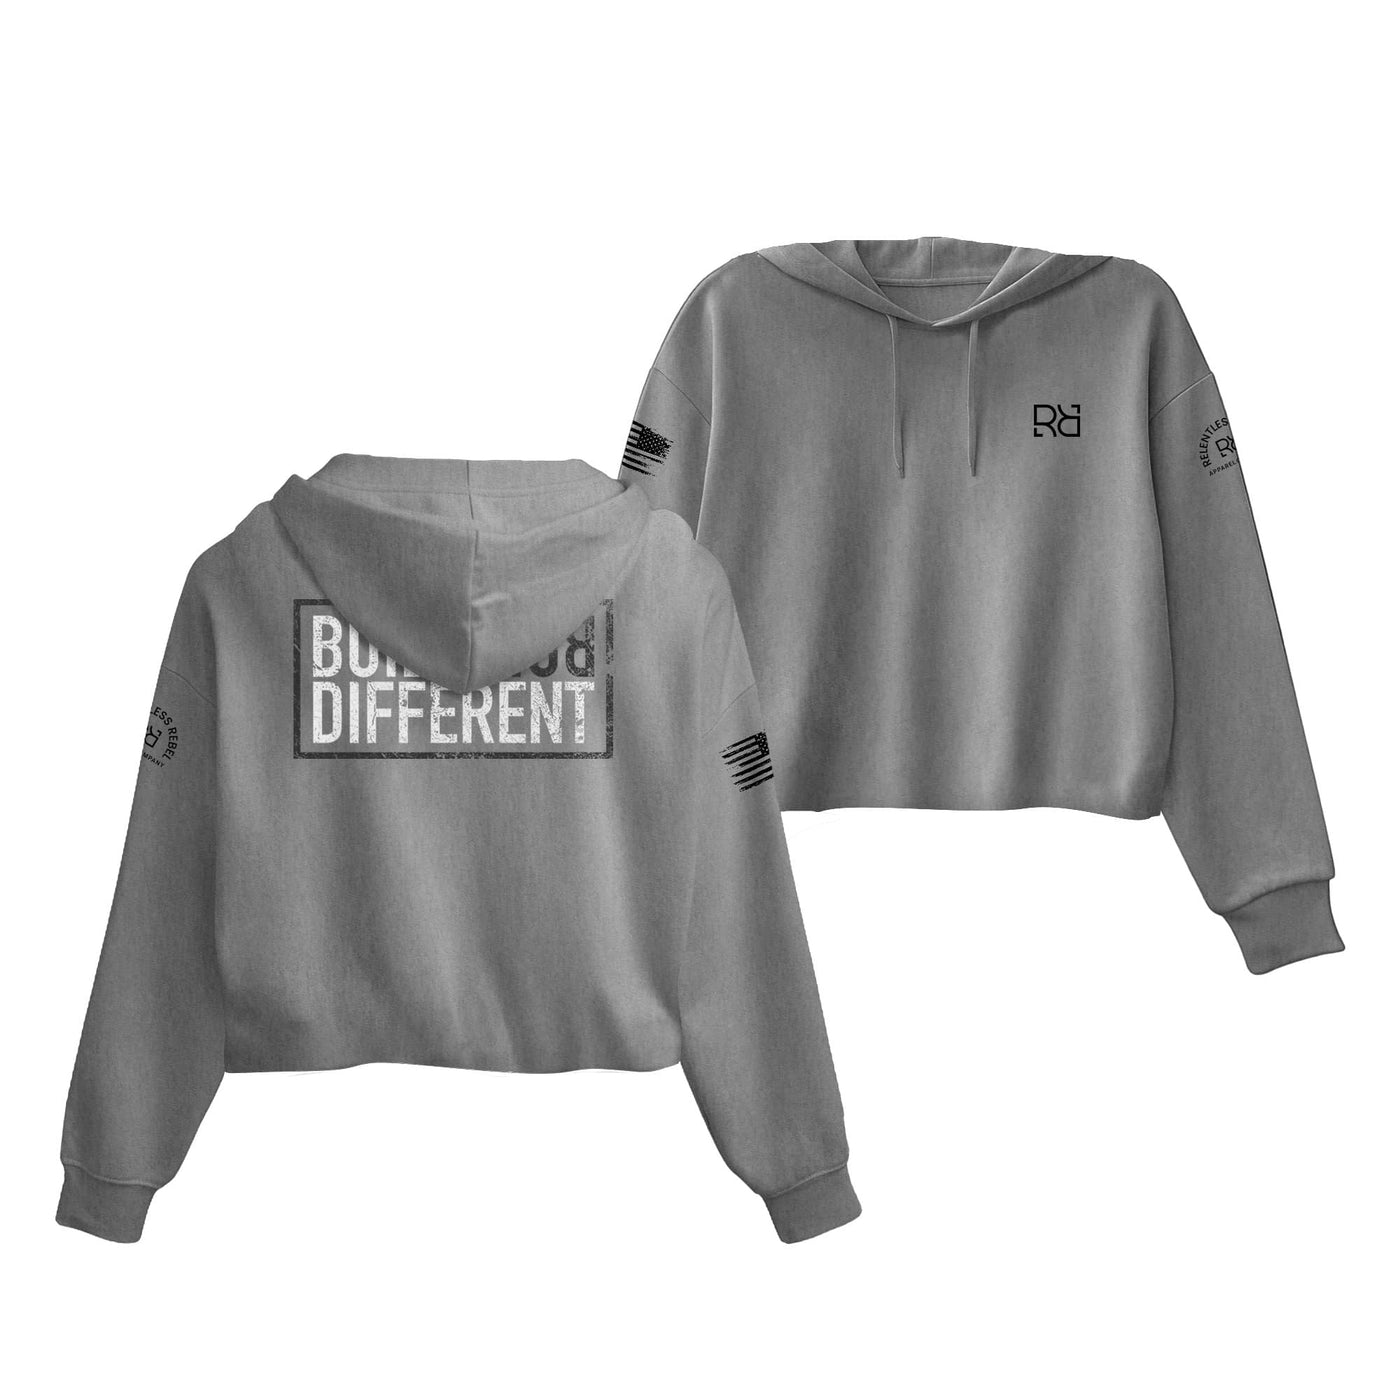 Built Different | Women's Cropped Hoodie